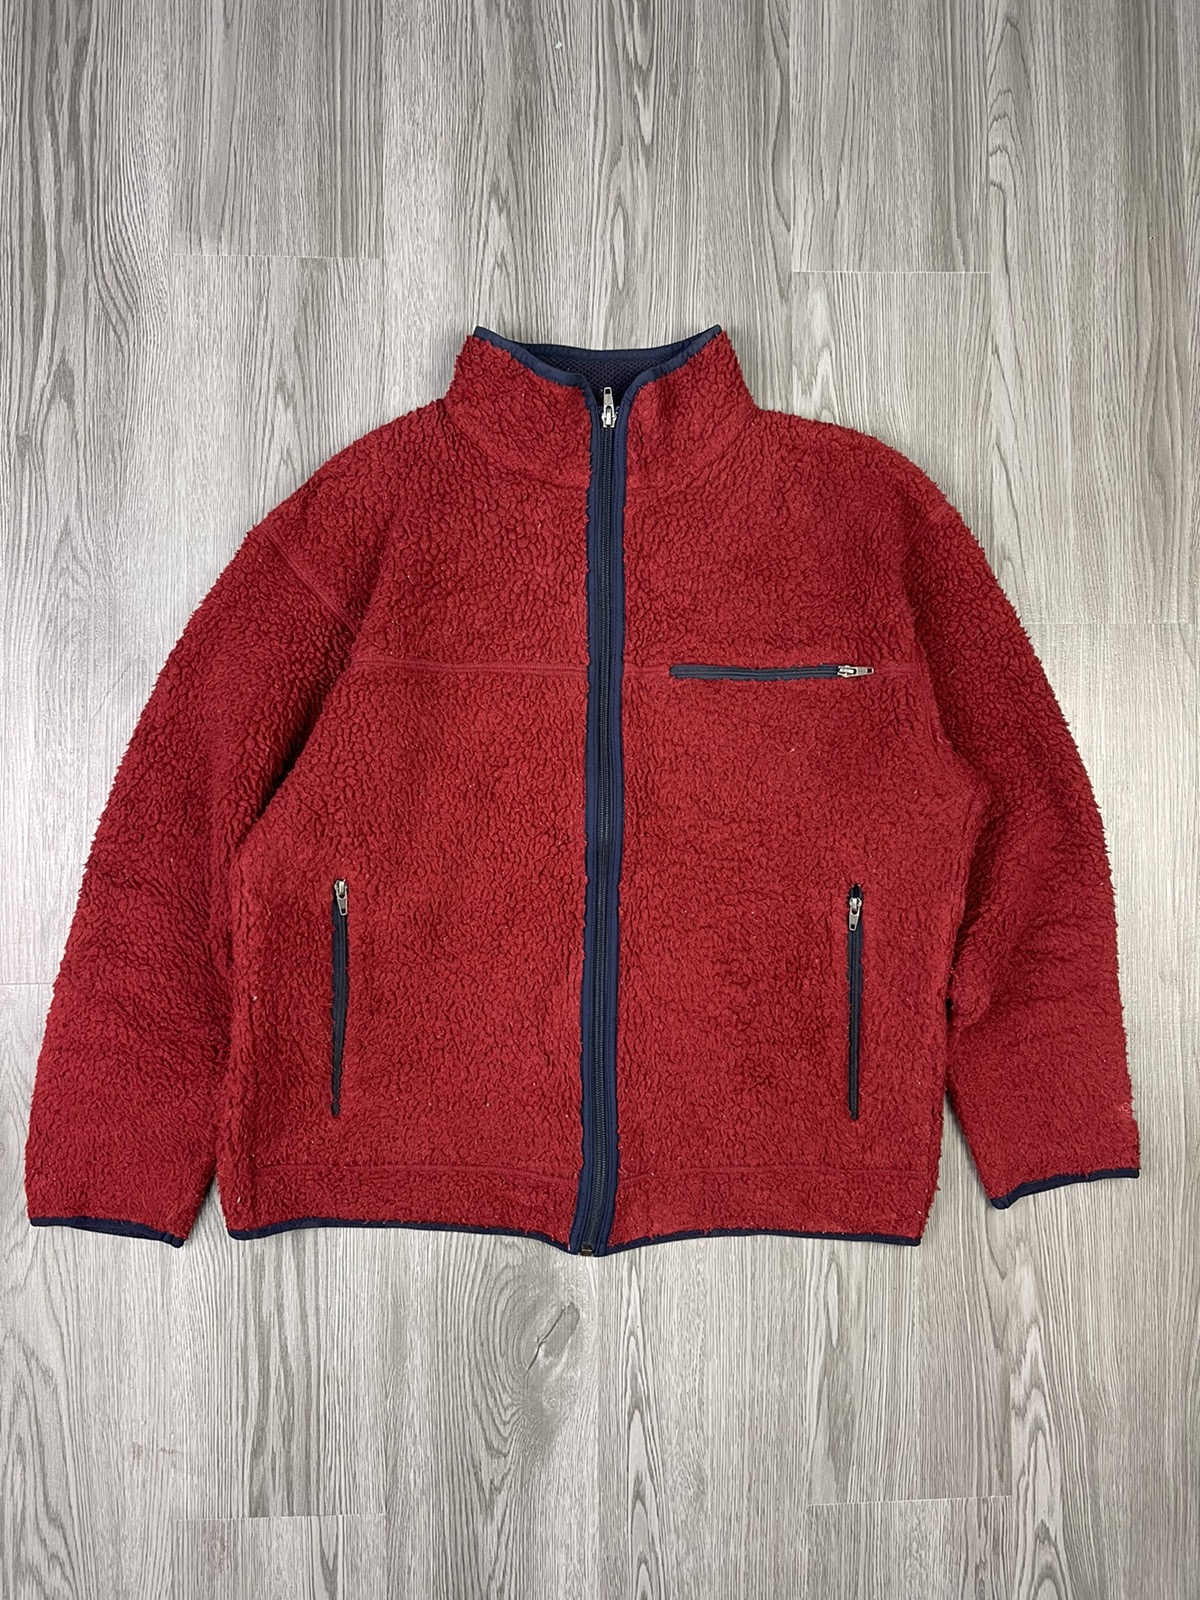 Red maroon The North Face fleece jacket - 1